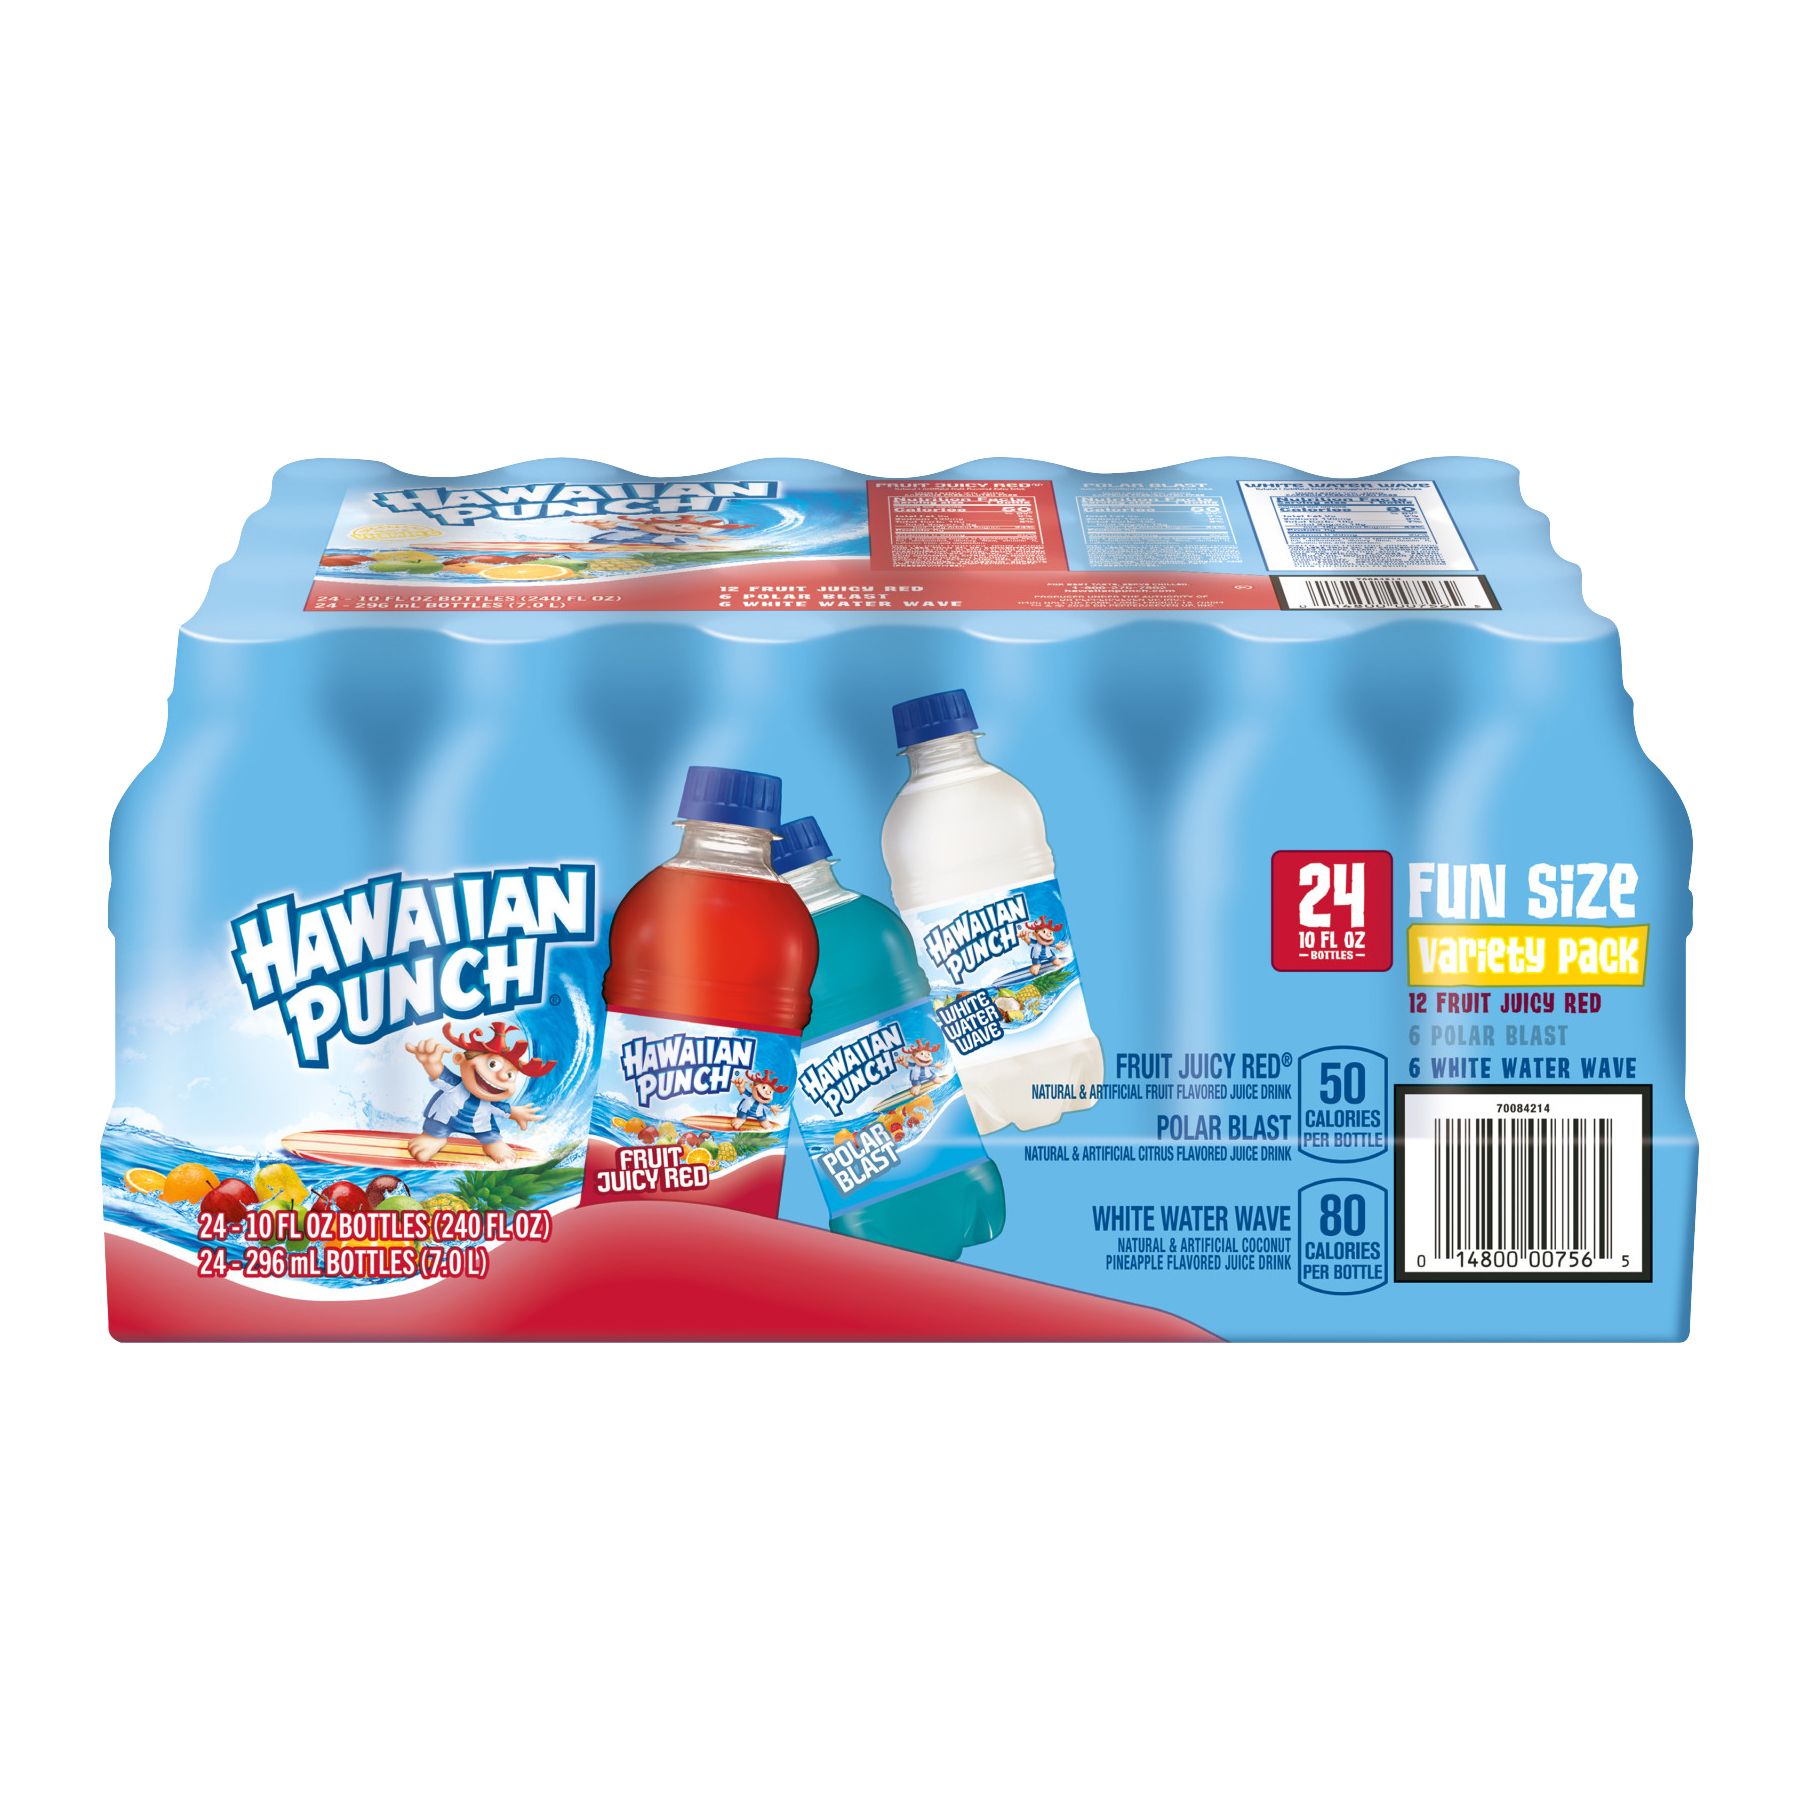 Hawaiian Punch Red White and Blue Variety Pack Bottles, 24 pk./10 fl. oz.